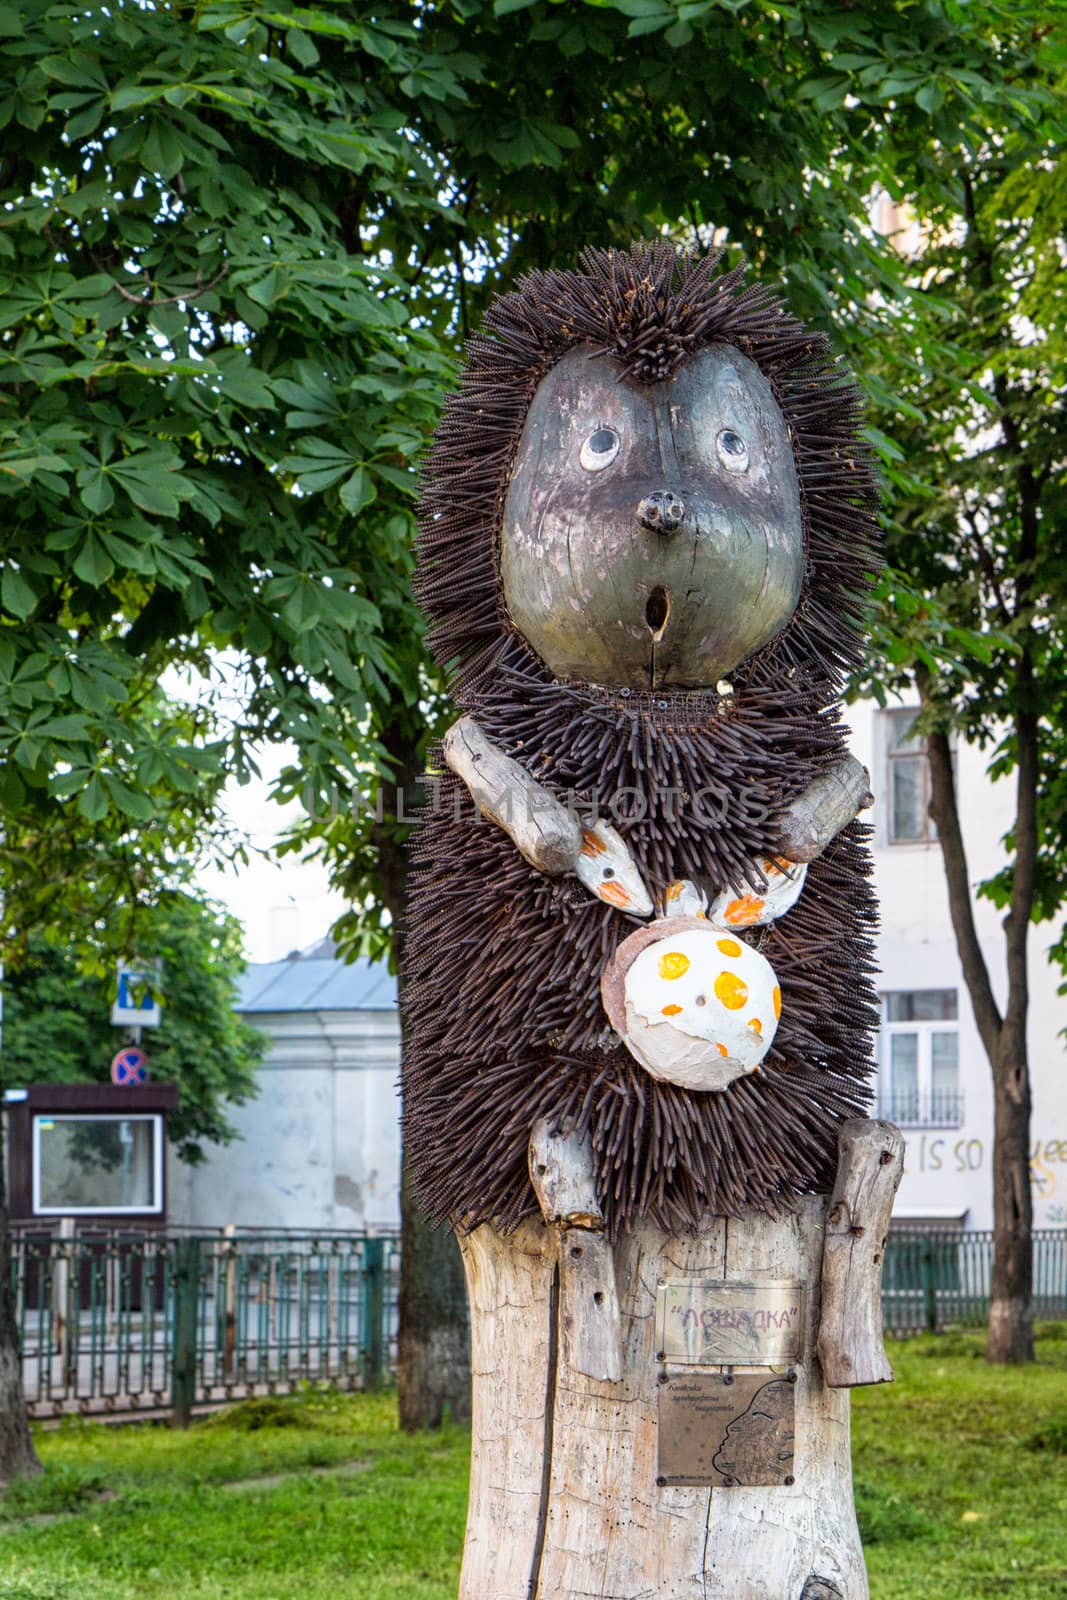 Statue of Hedgehog in the fog, a fictional character